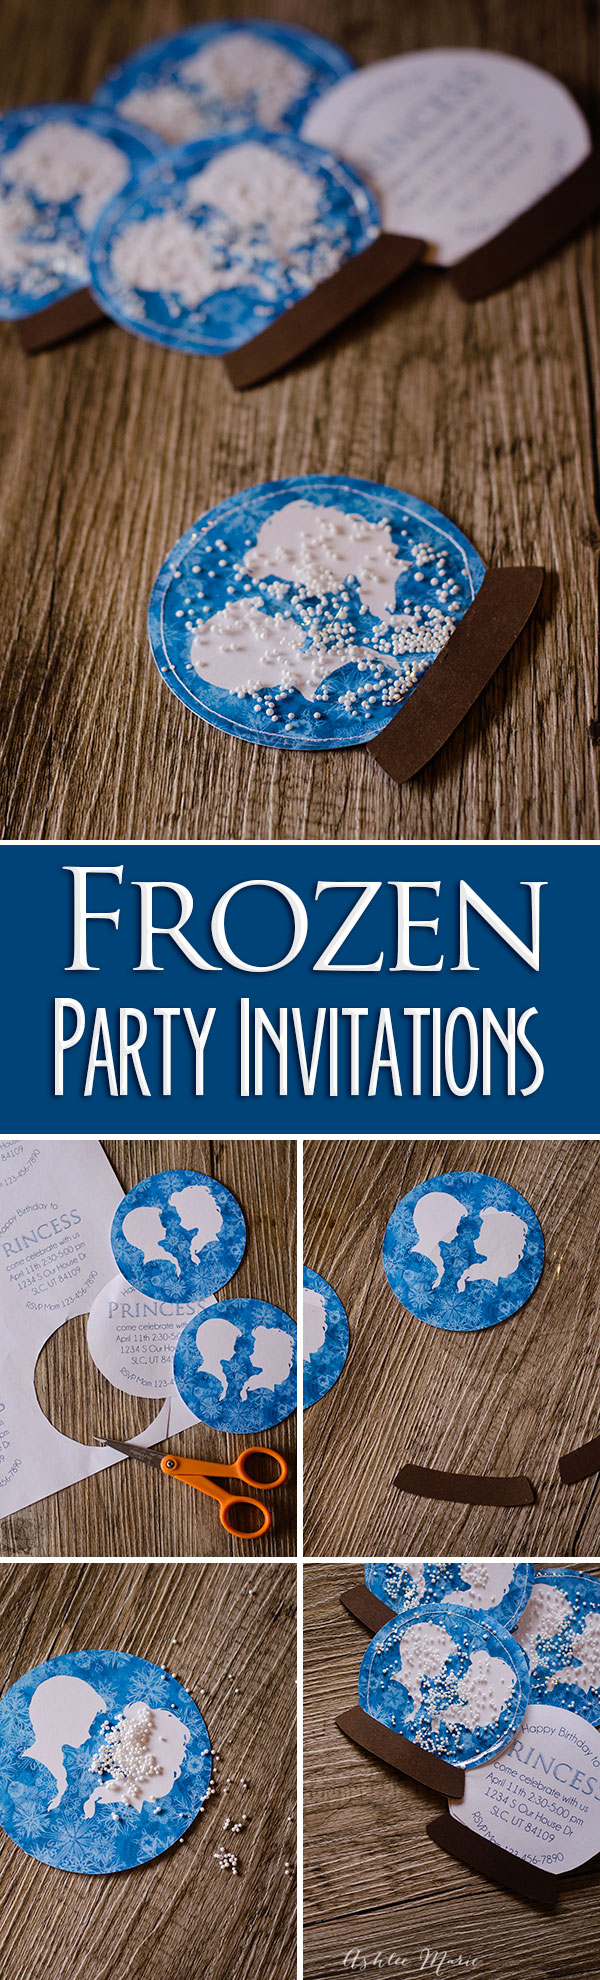 These Frozen birthday party invitations are made to look just like snow globes, free printables